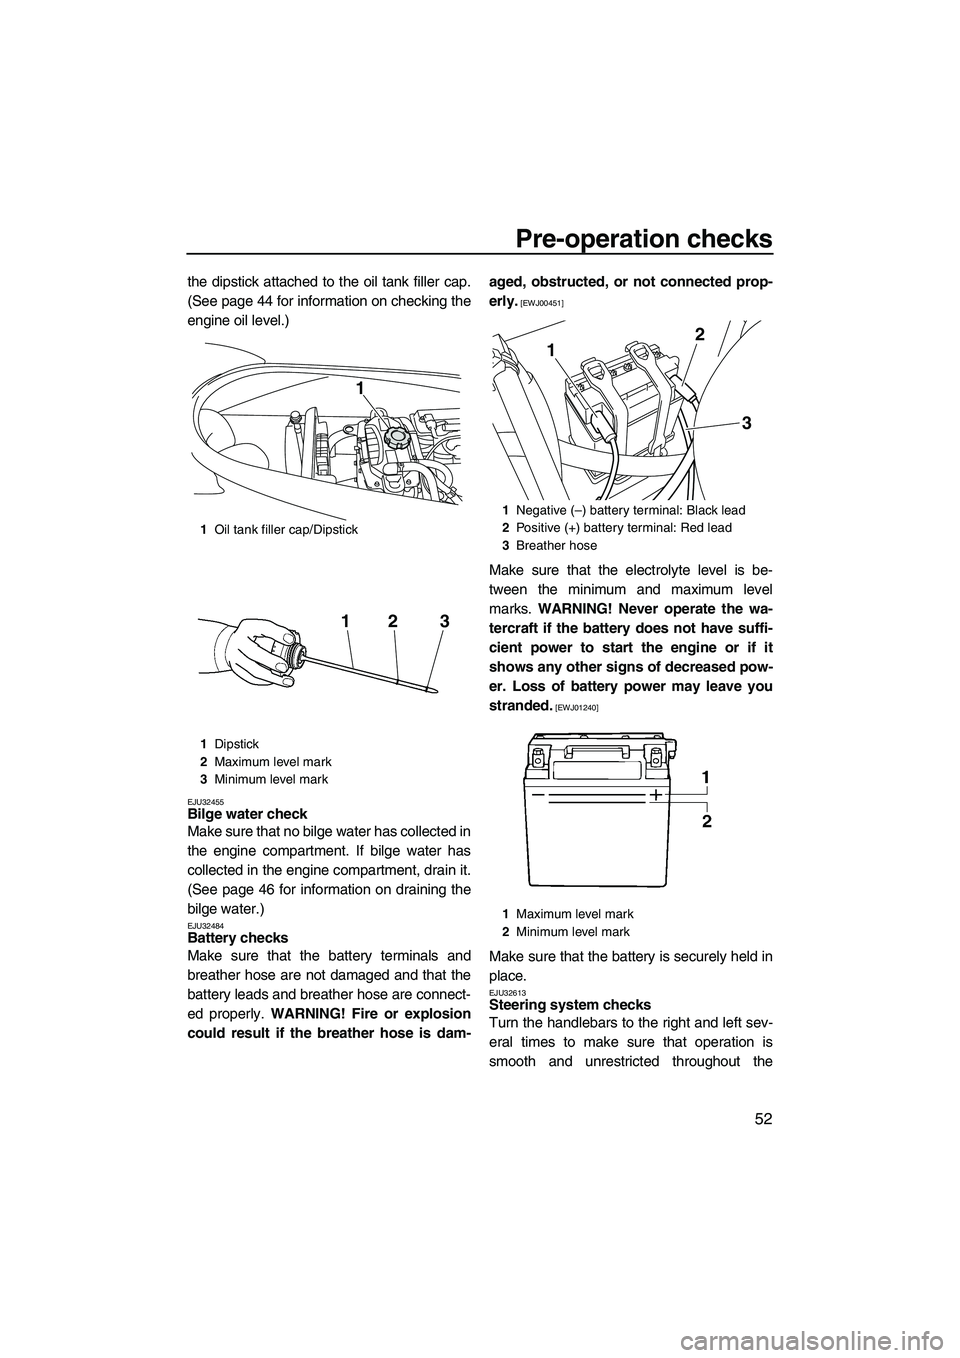 YAMAHA VX CRUISER 2010  Owners Manual Pre-operation checks
52
the dipstick attached to the oil tank filler cap.
(See page 44 for information on checking the
engine oil level.)
EJU32455Bilge water check 
Make sure that no bilge water has c